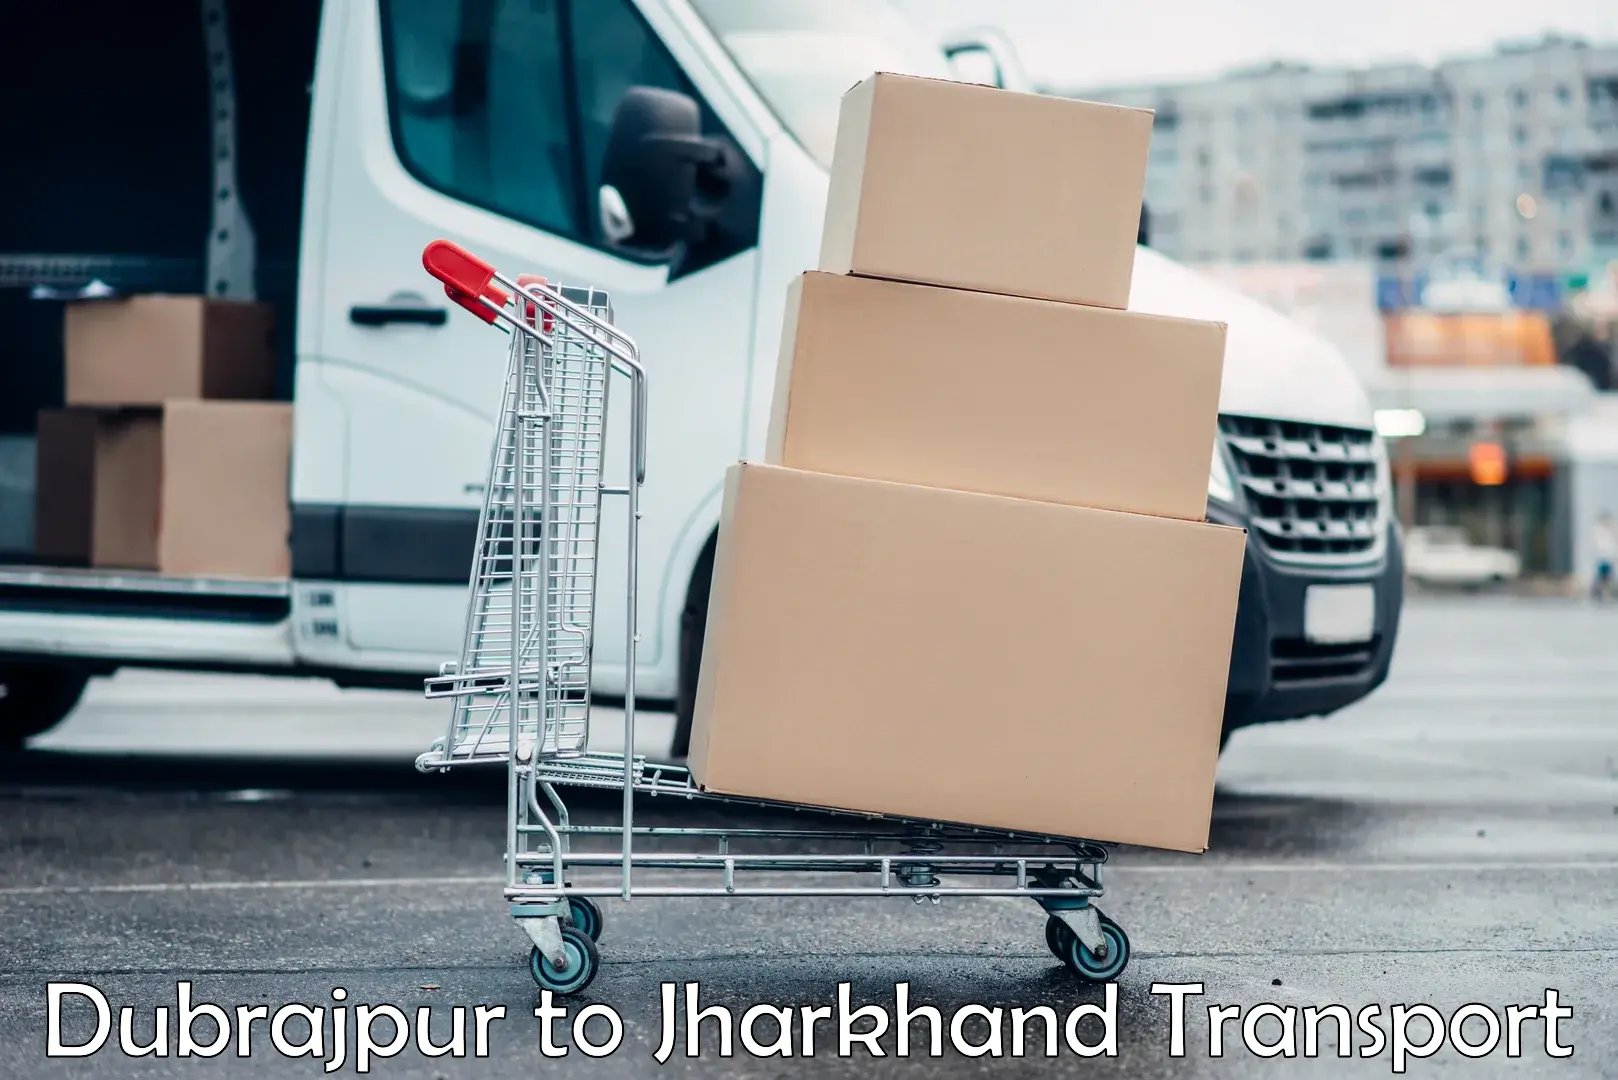 Online transport service Dubrajpur to Jharkhand